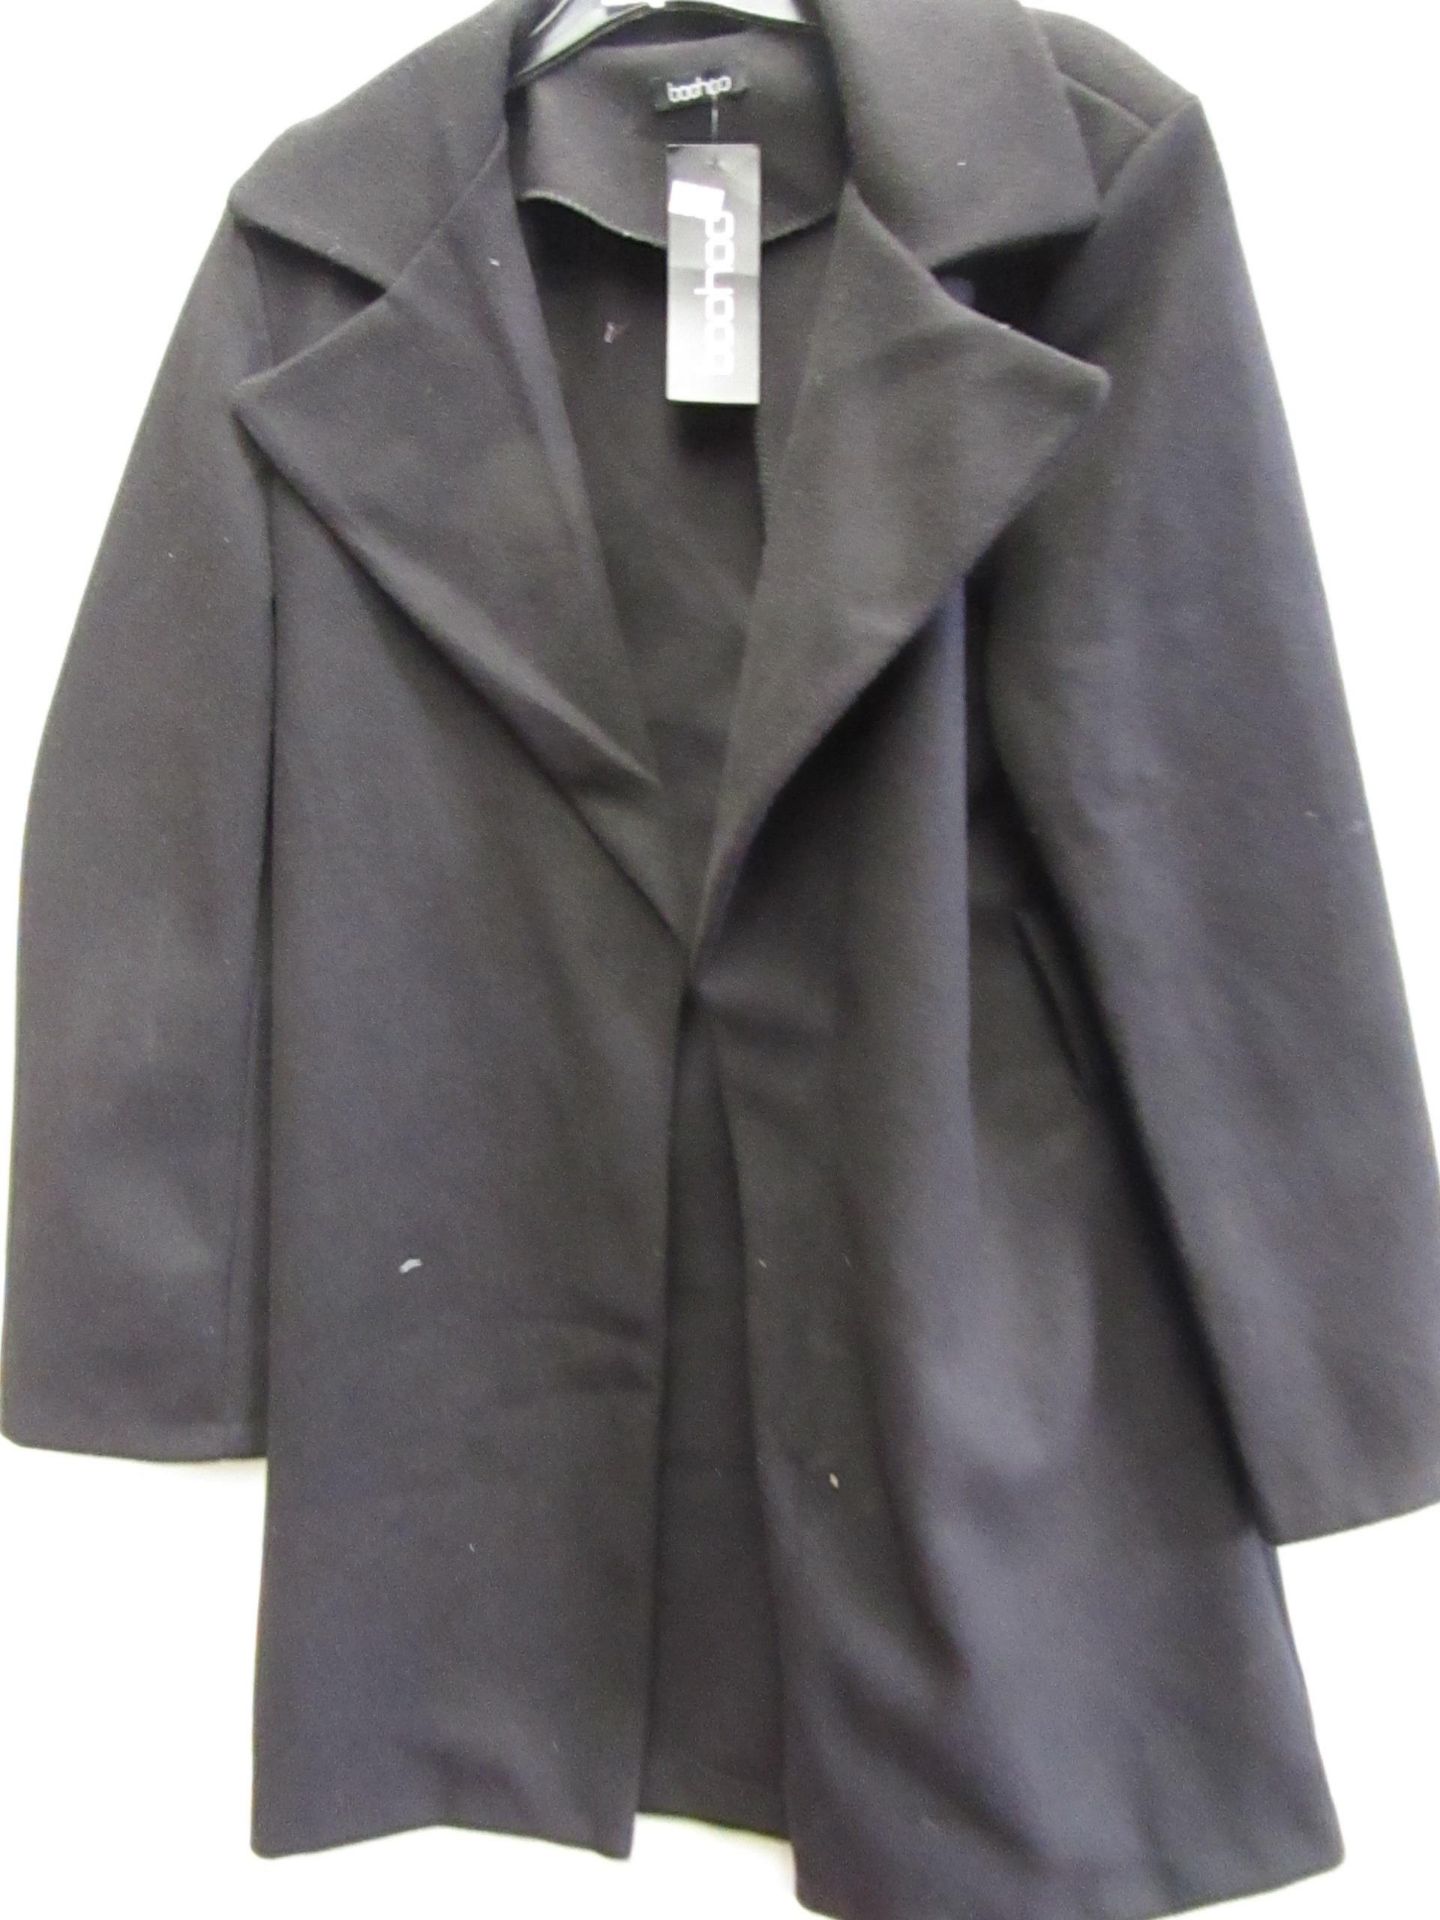 Boo Hoo Black Wool Look Coat size 12 new with tag